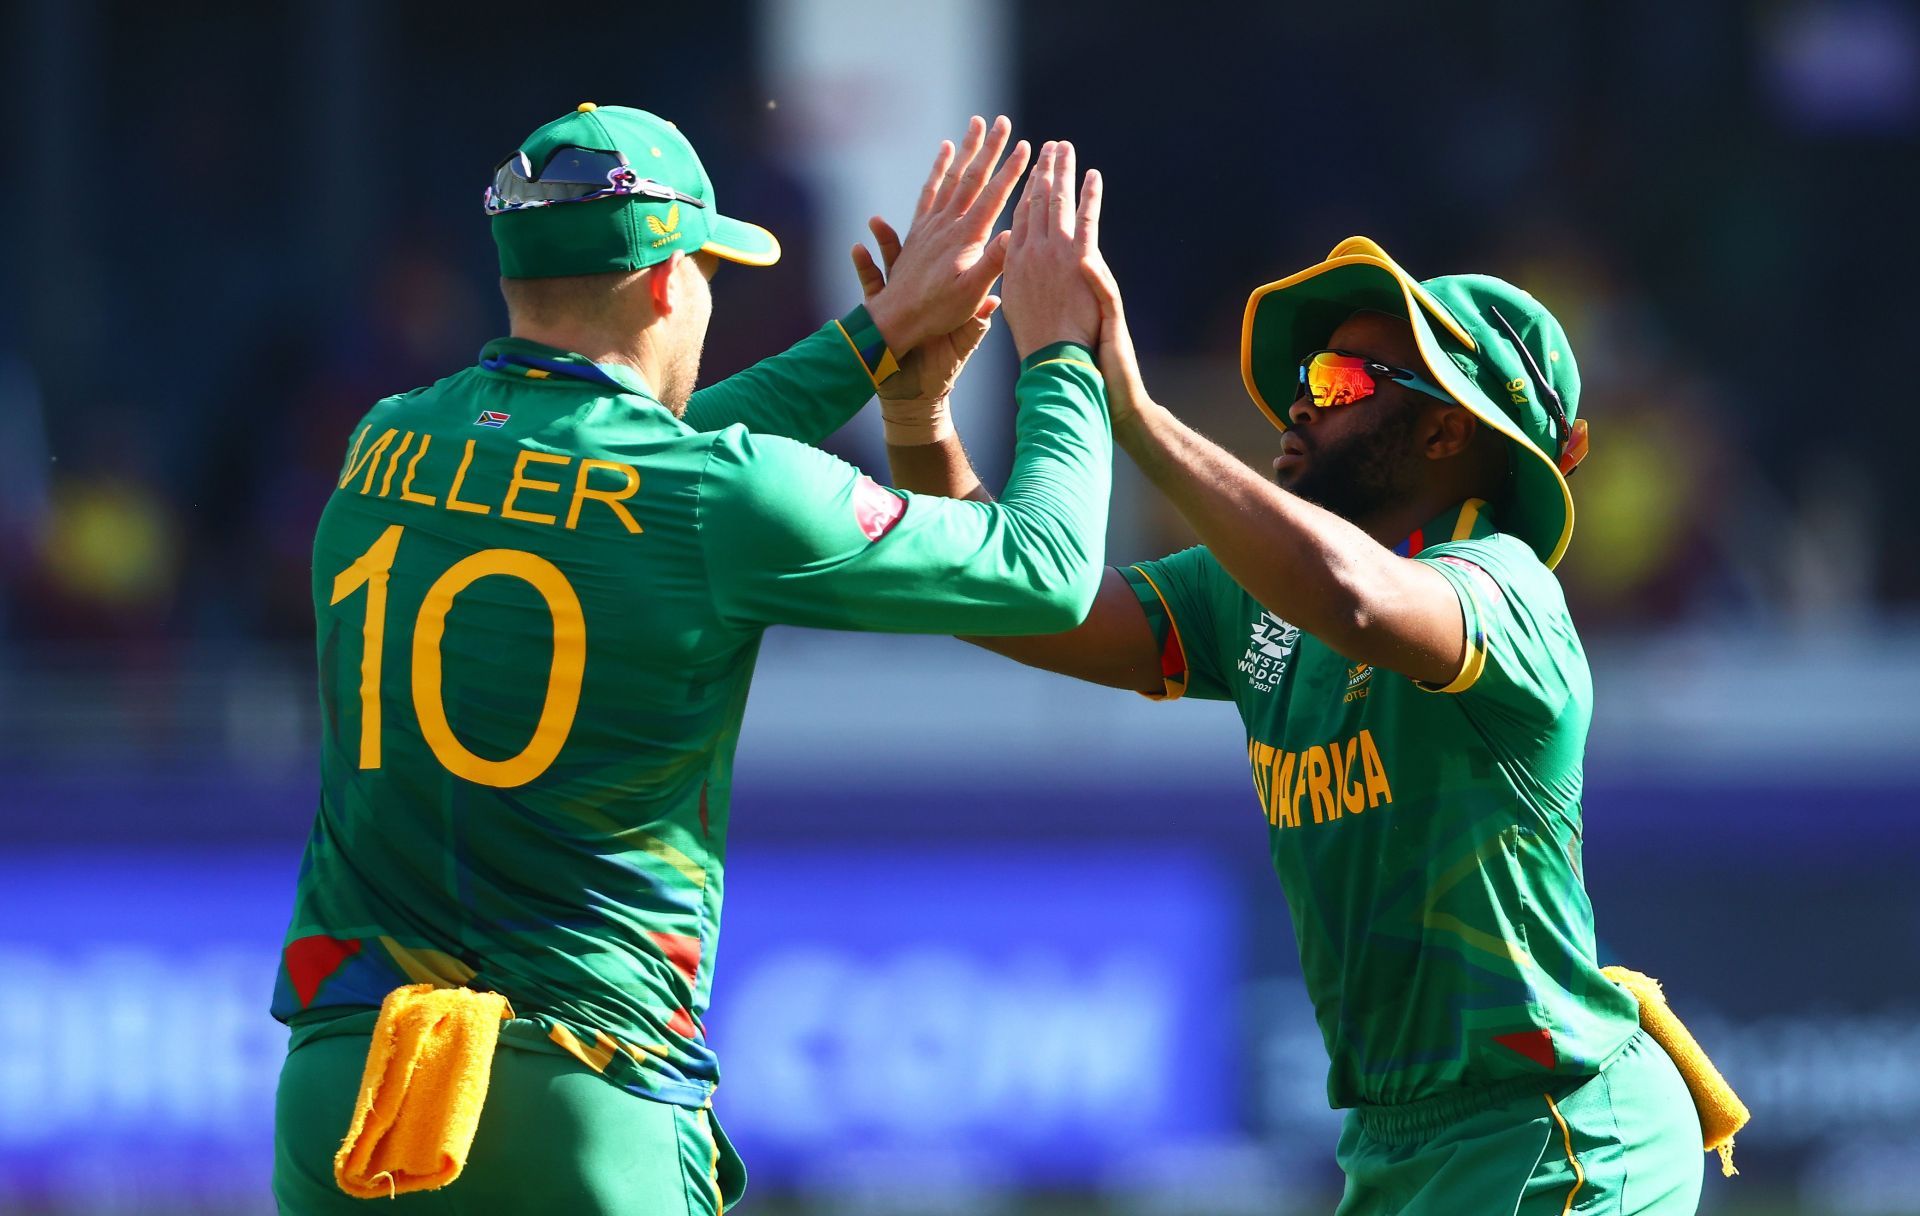 Temba Bavuma is confident that IPL 2022 will do David Miller a world of good (Credit: Getty Images)